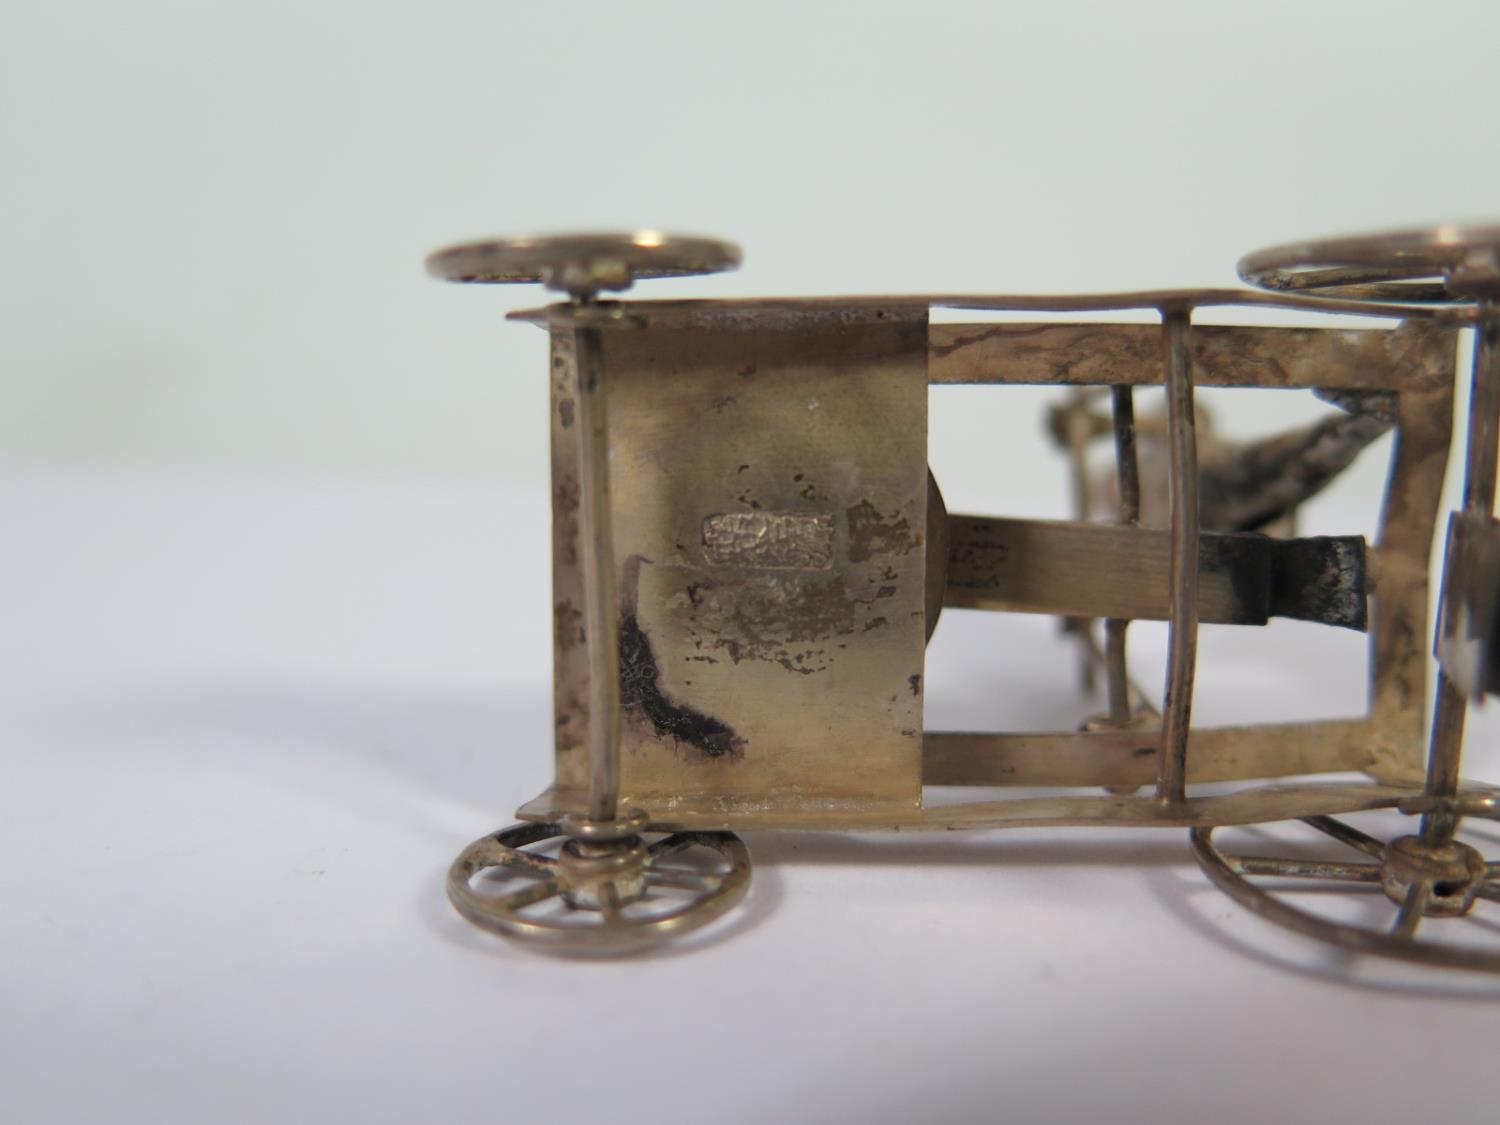 A Hong Kong Silver Miniature of an Articulated Four Wheel Cart with bowl and crushing mechanism - Image 2 of 2